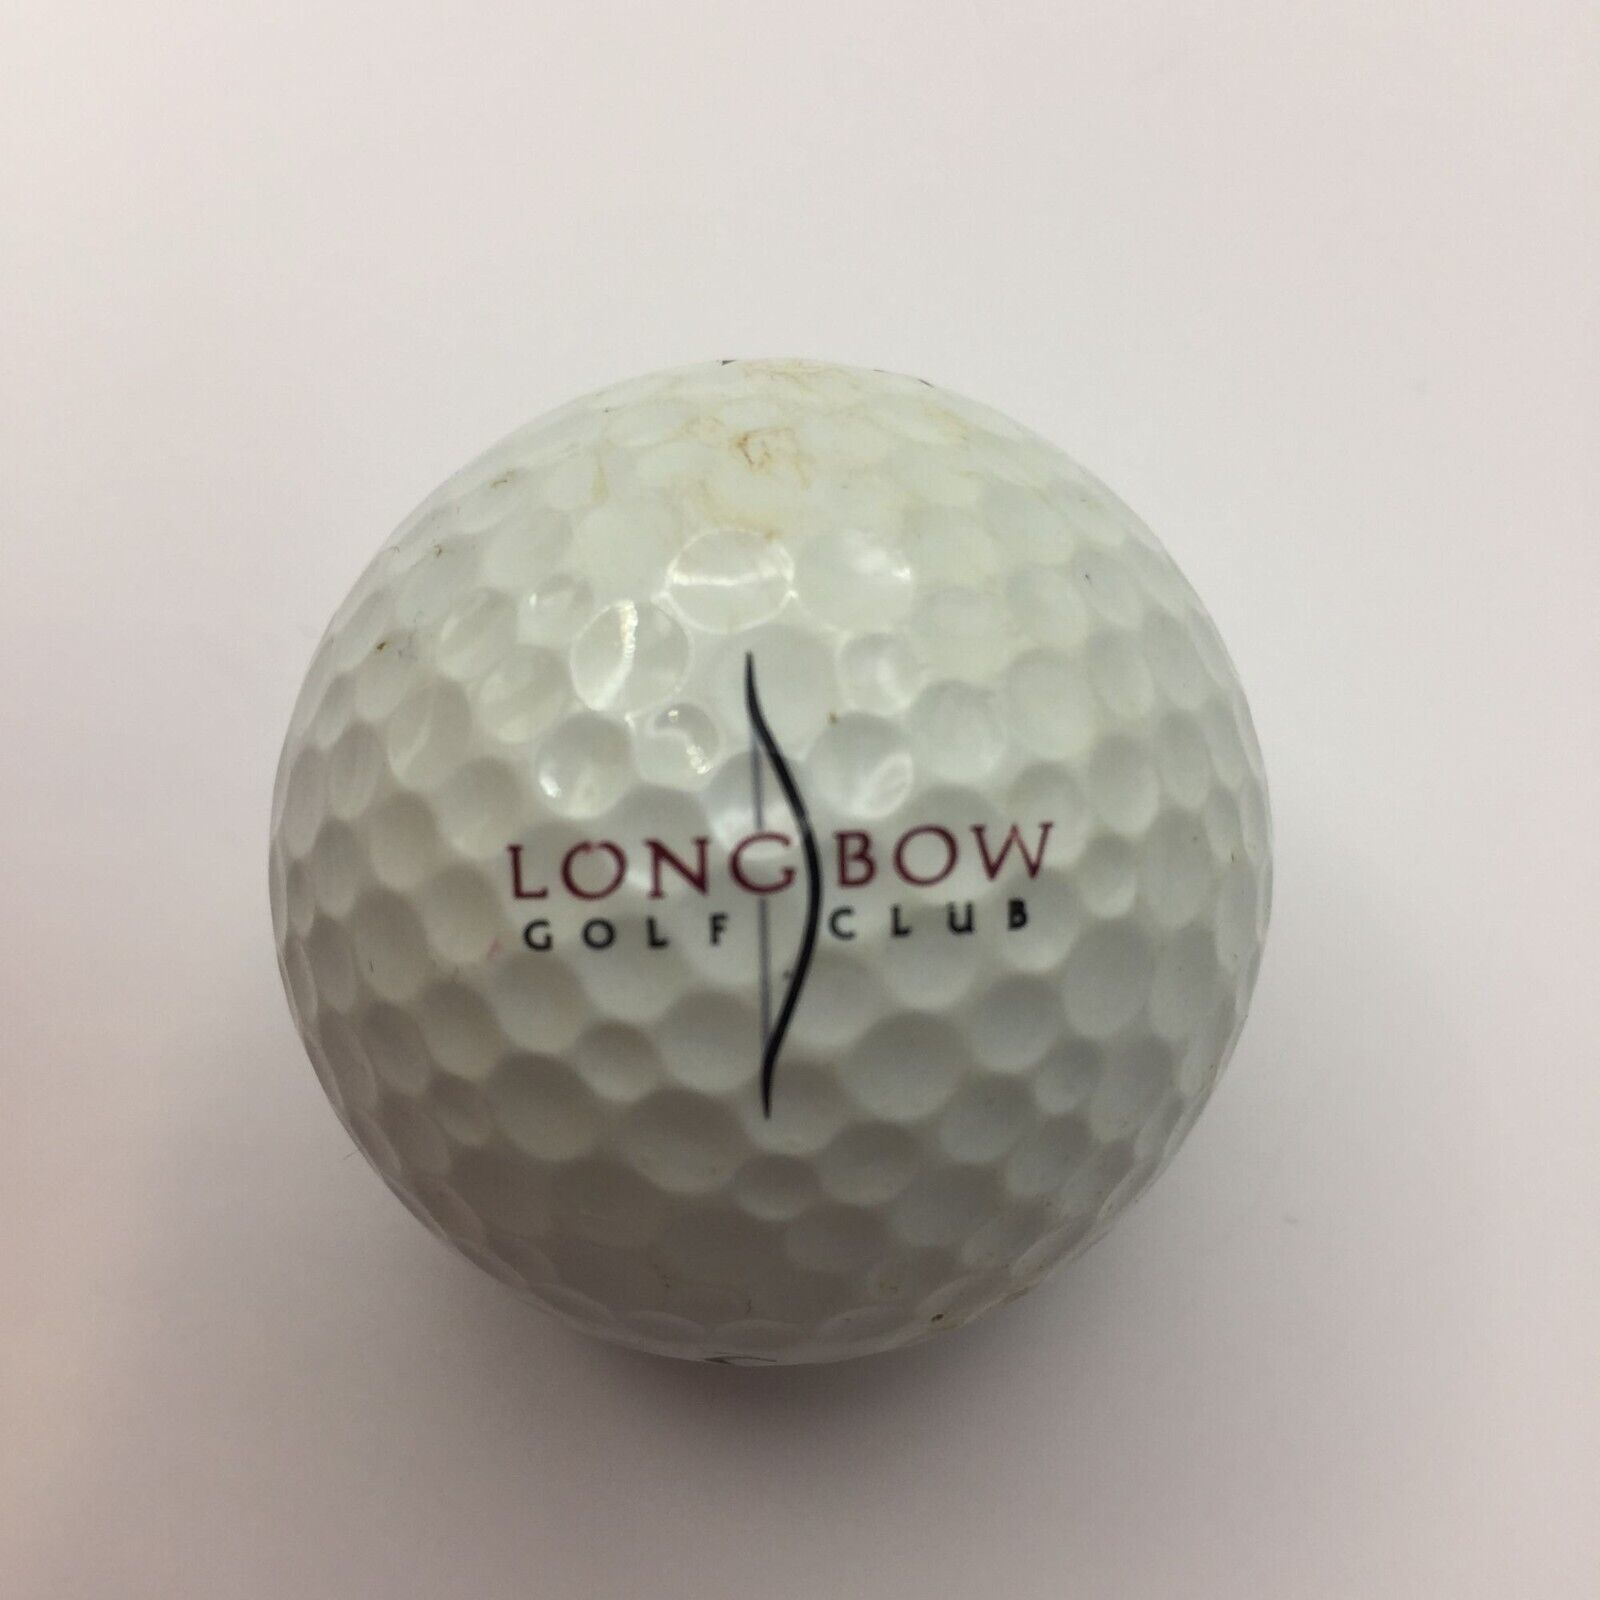 Primary image for Maxfli 4 White Golf Ball Longbow Long Bow Golf Club 10 TEN